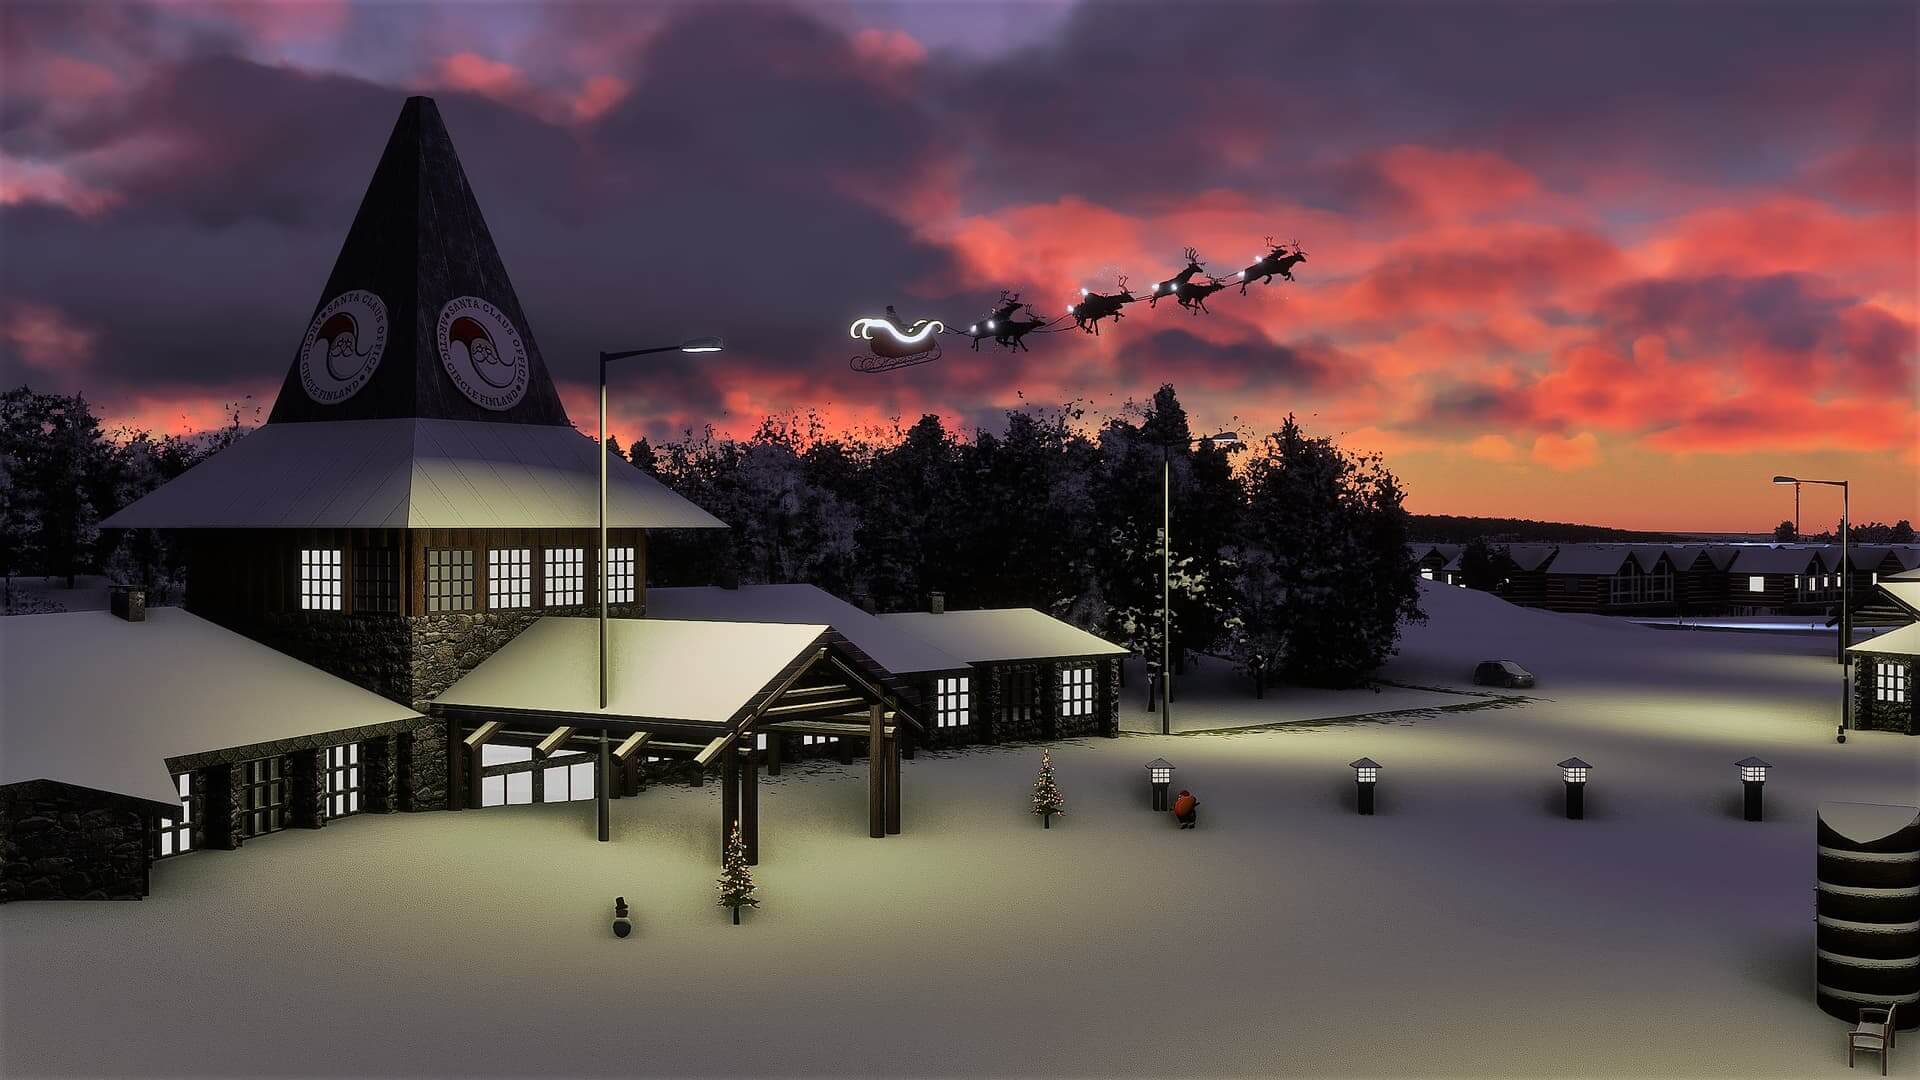 Santa and his sleigh fly over Lapland, Finland.